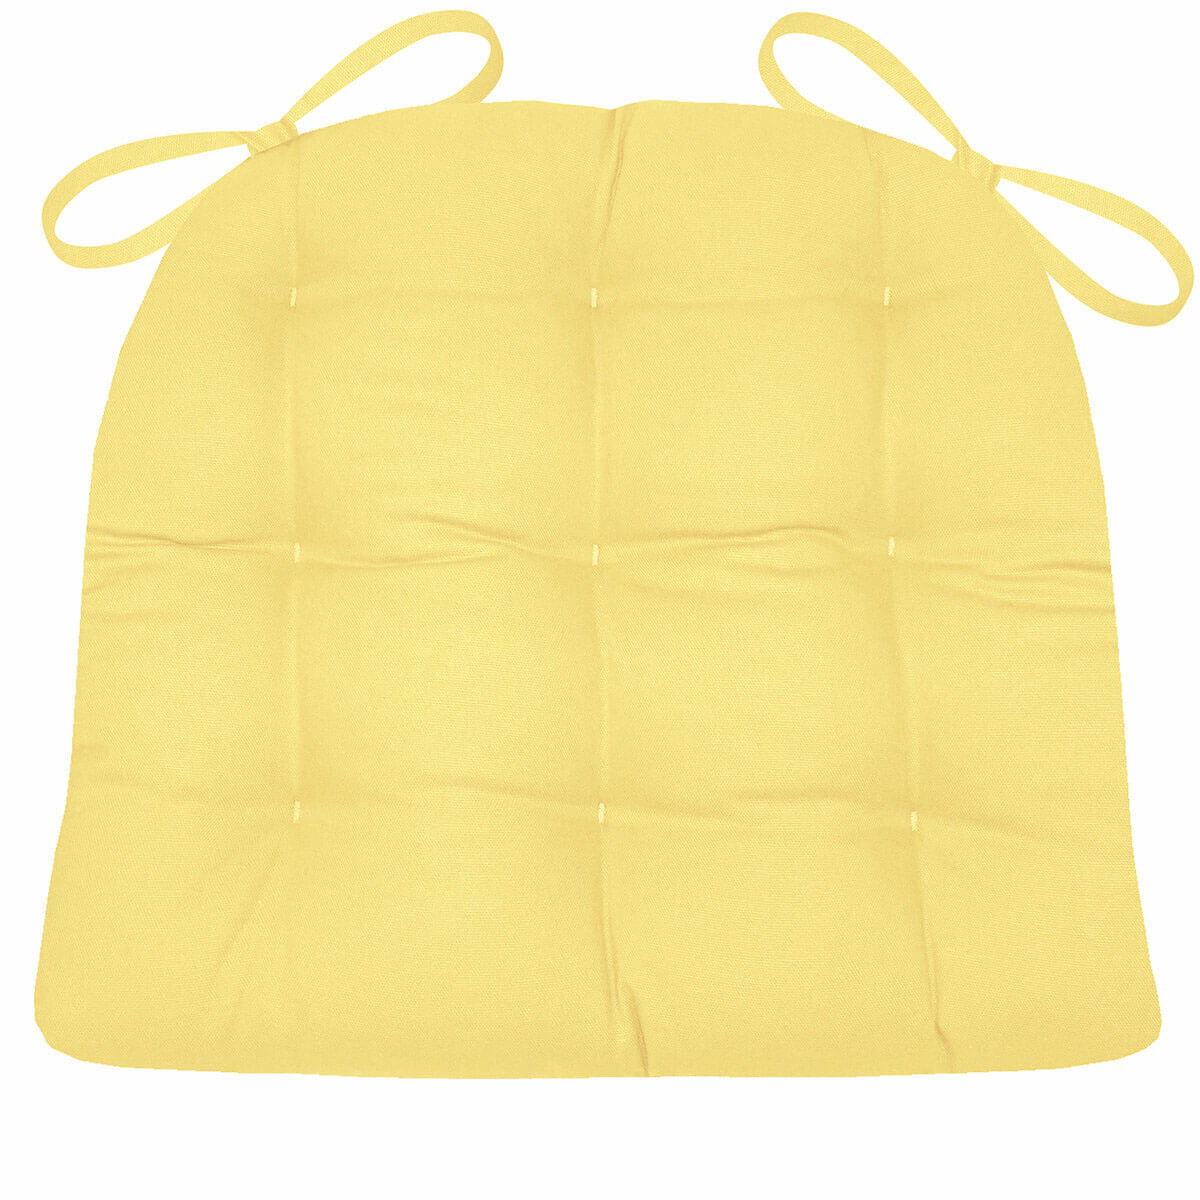 Cotton Duck Yellow Solid Color Dining Chair Pads - Latex Foam Fill